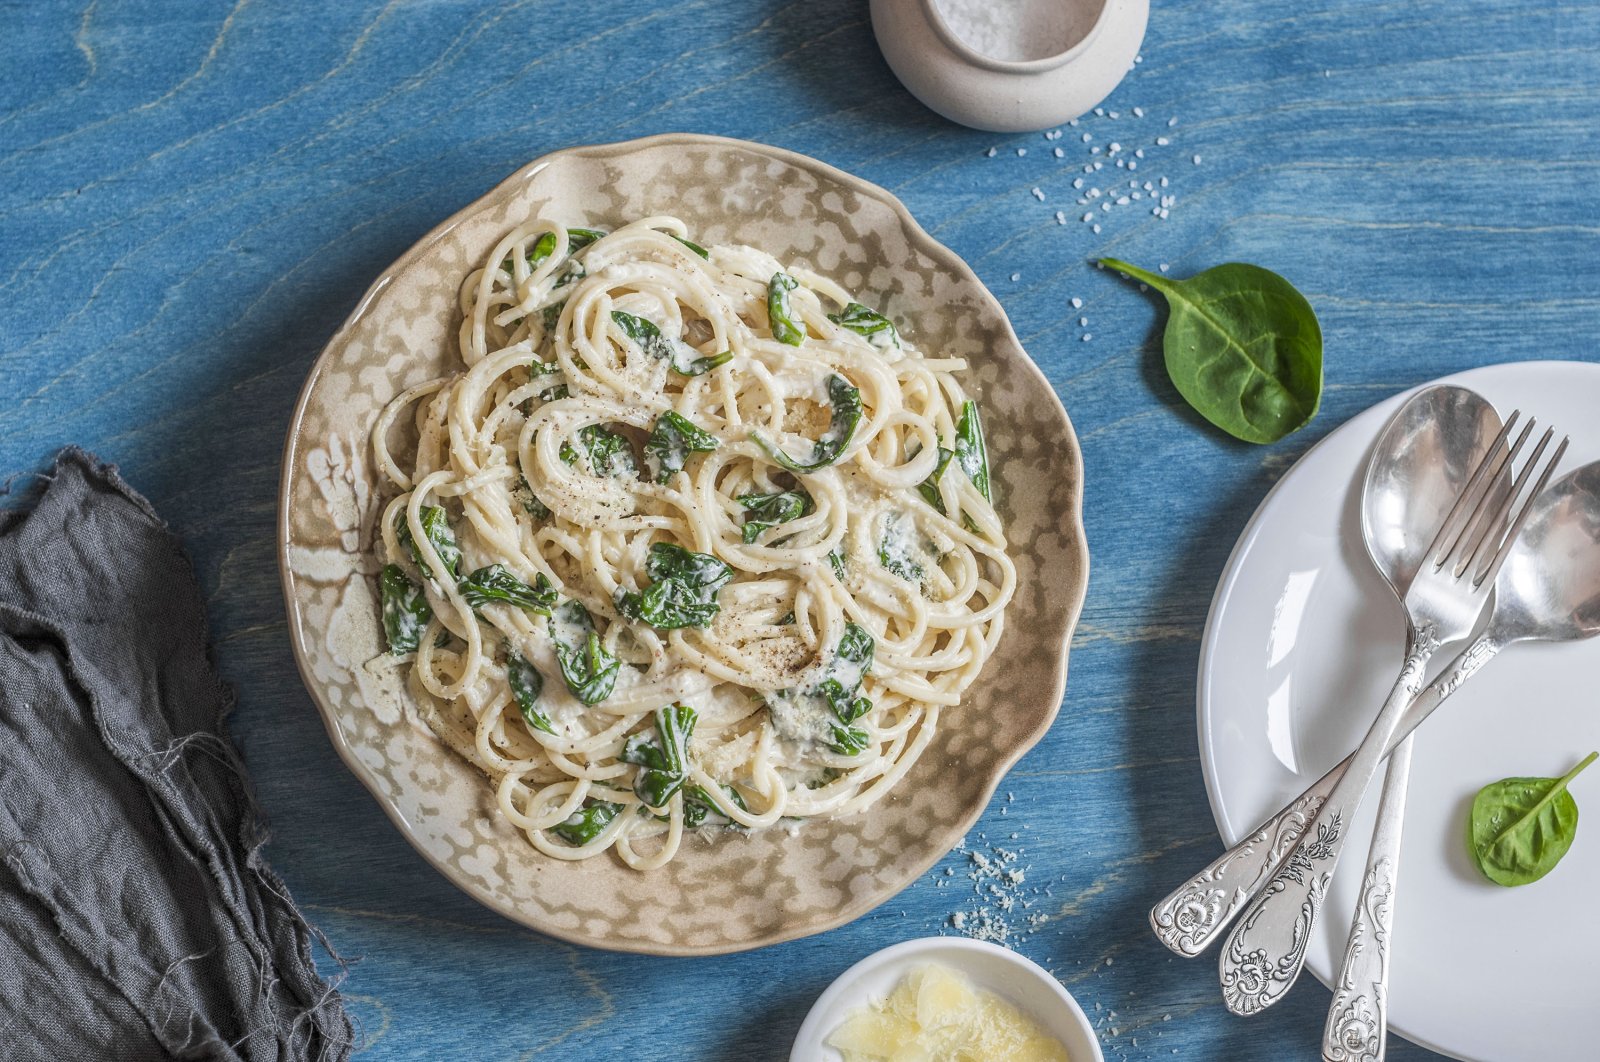 You can add parmesan while serving creamy spinach spaghetti. (Shutterstock) 